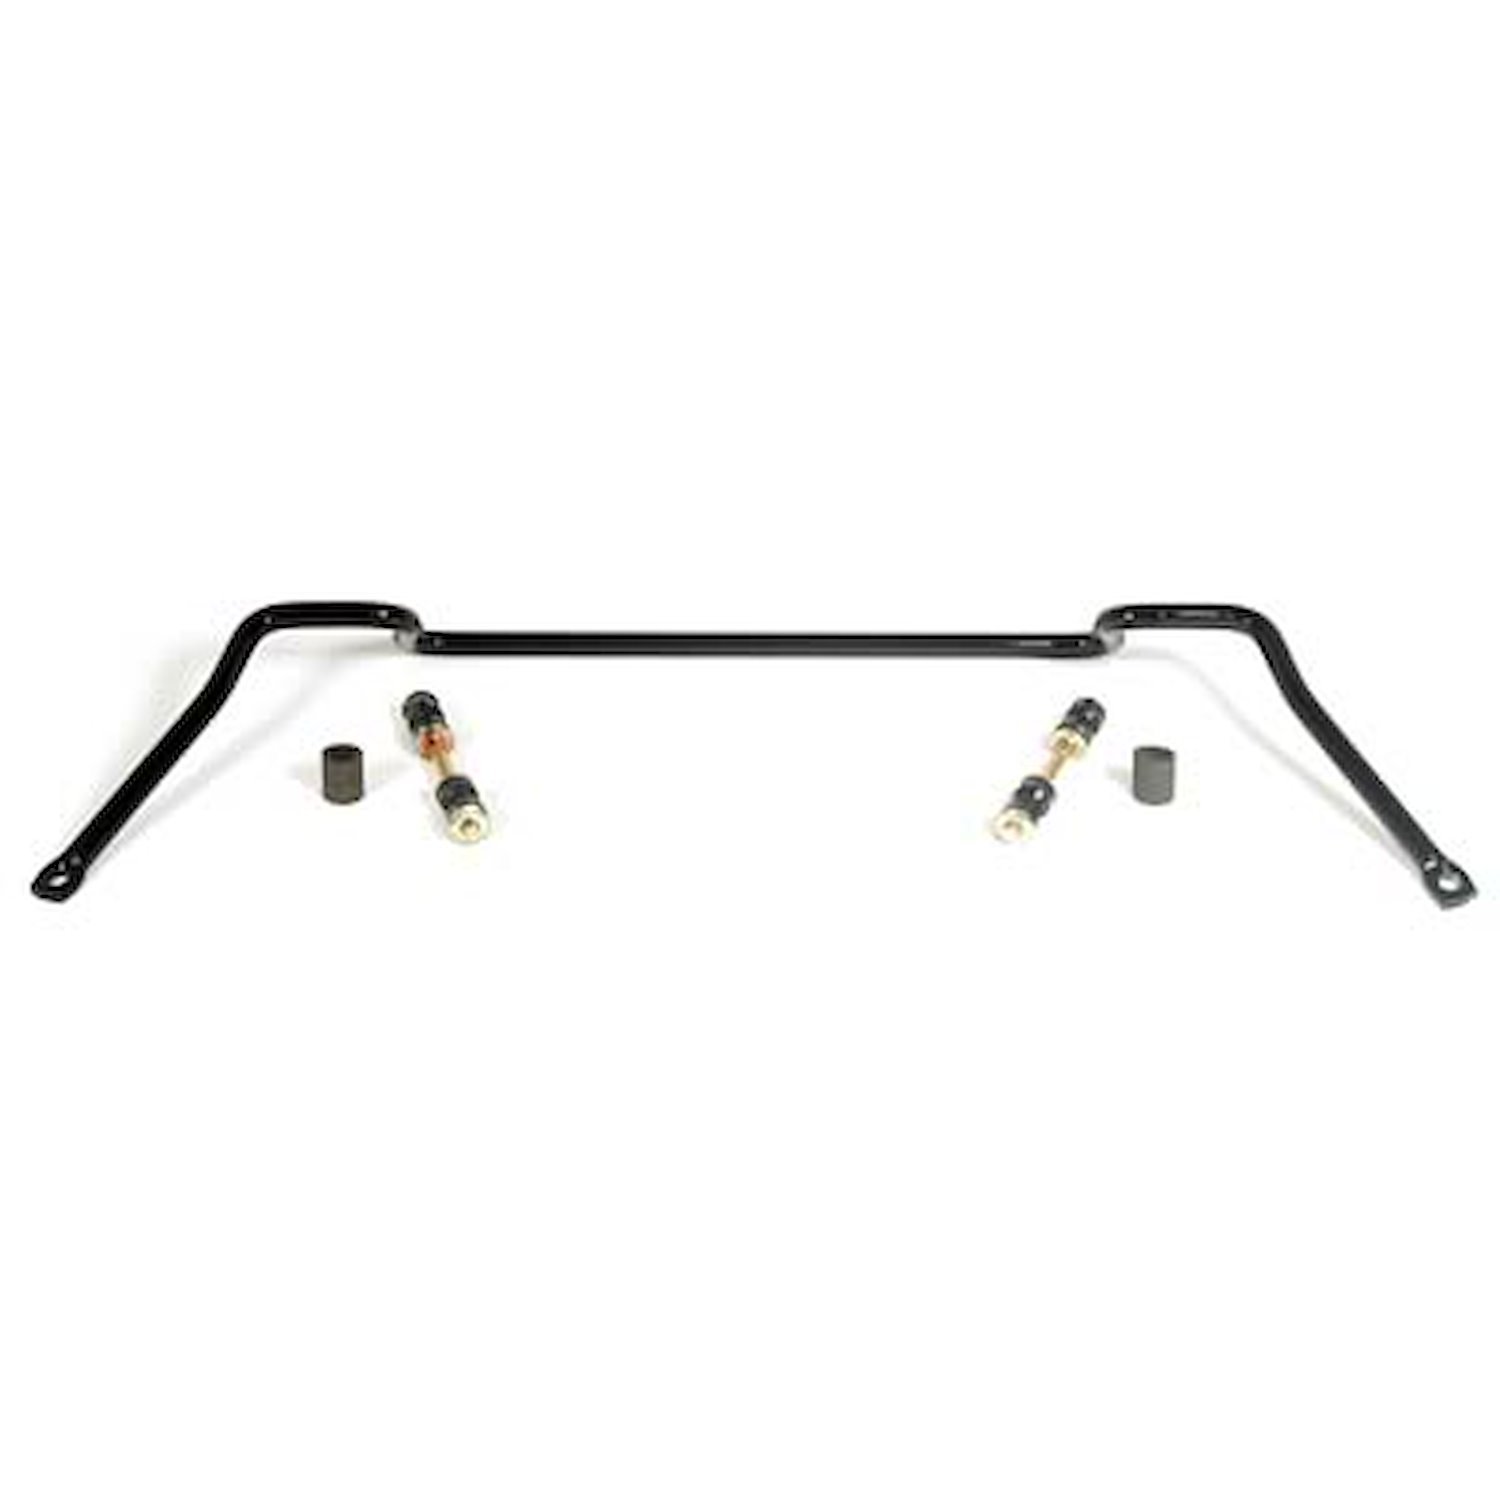 1 1/8" Front Sway bar 1979-91 Ford Full Size